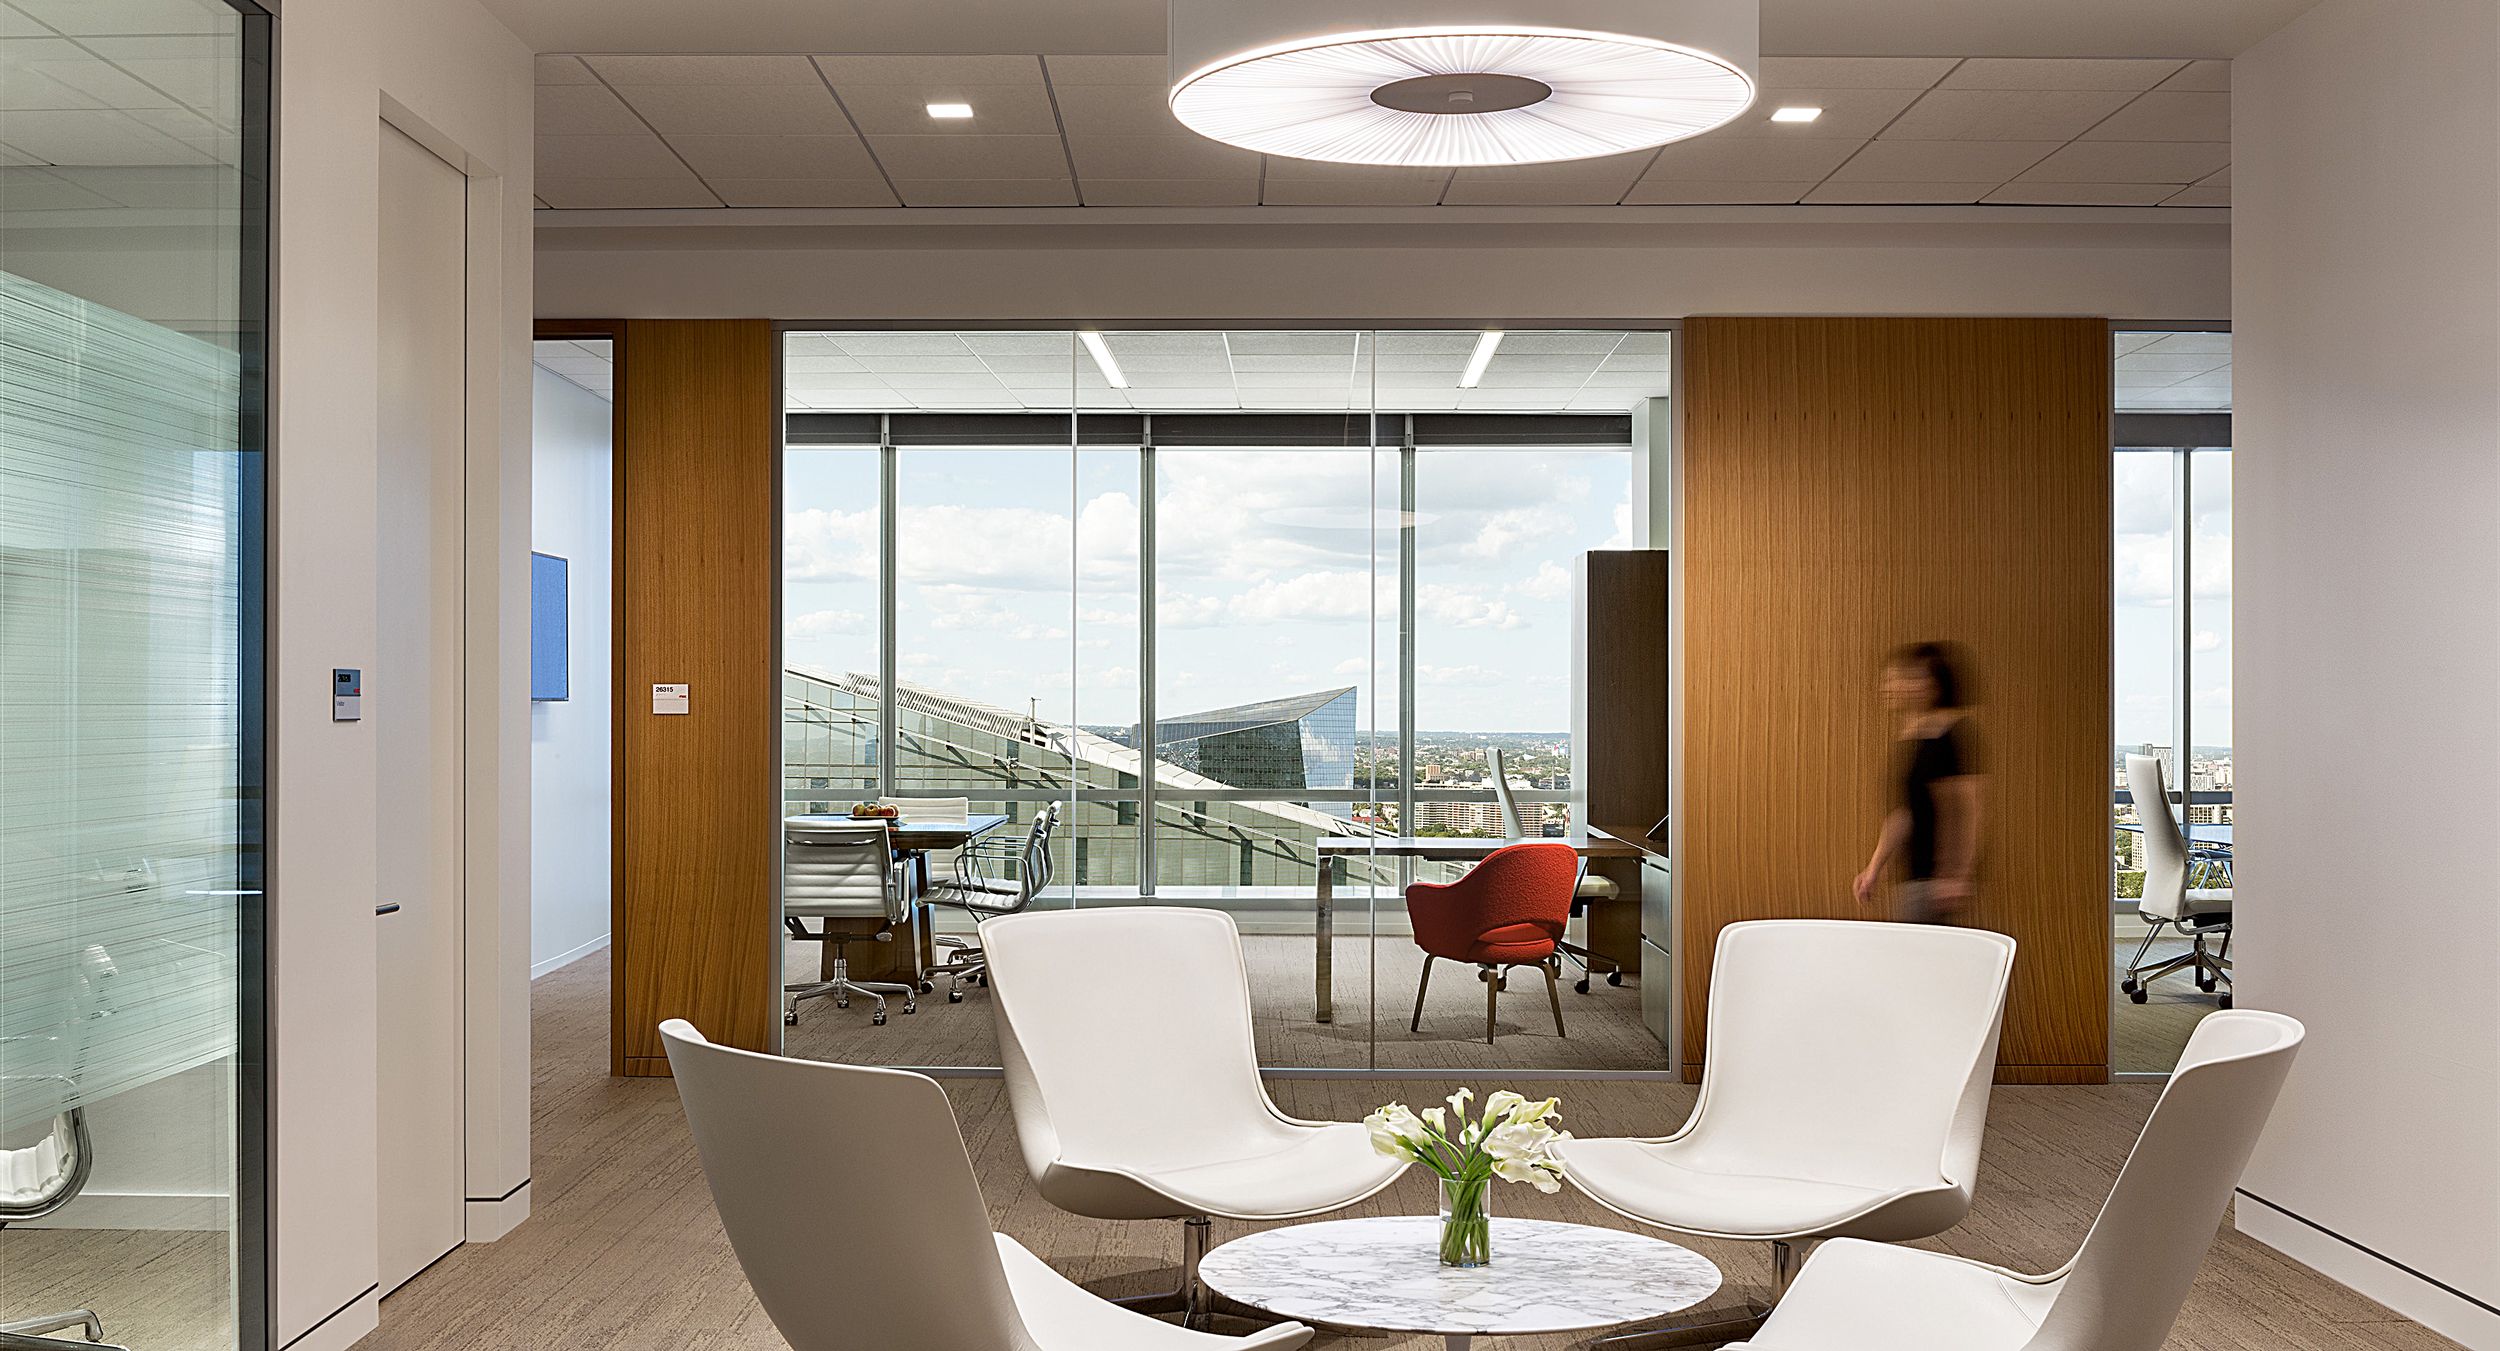 Spectacular views and a NEW MILLENNIA private office paired with a MESA conference table.